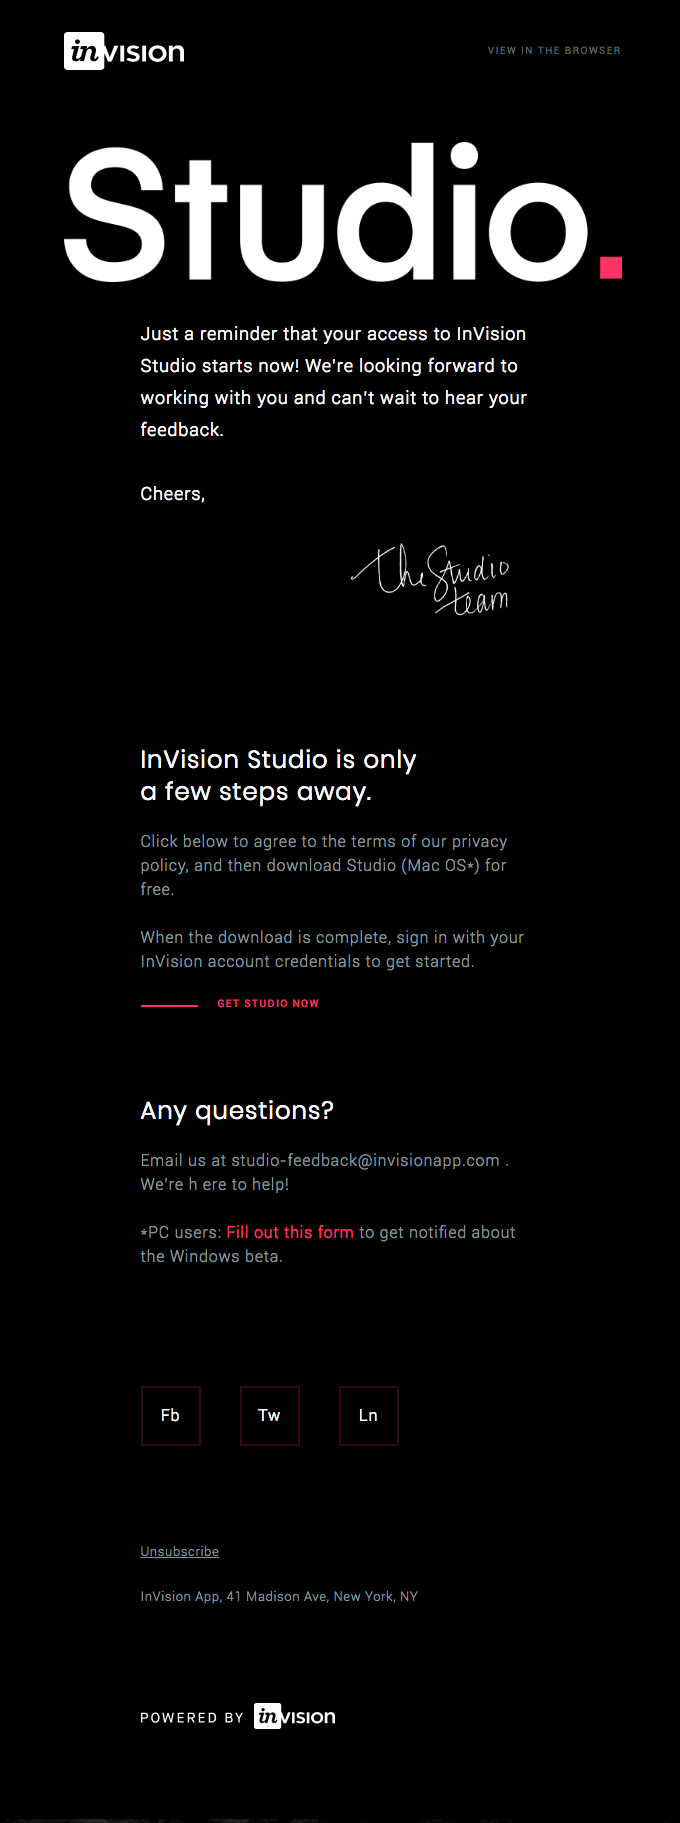 Reminder: Your early access to InVision Studio starts now